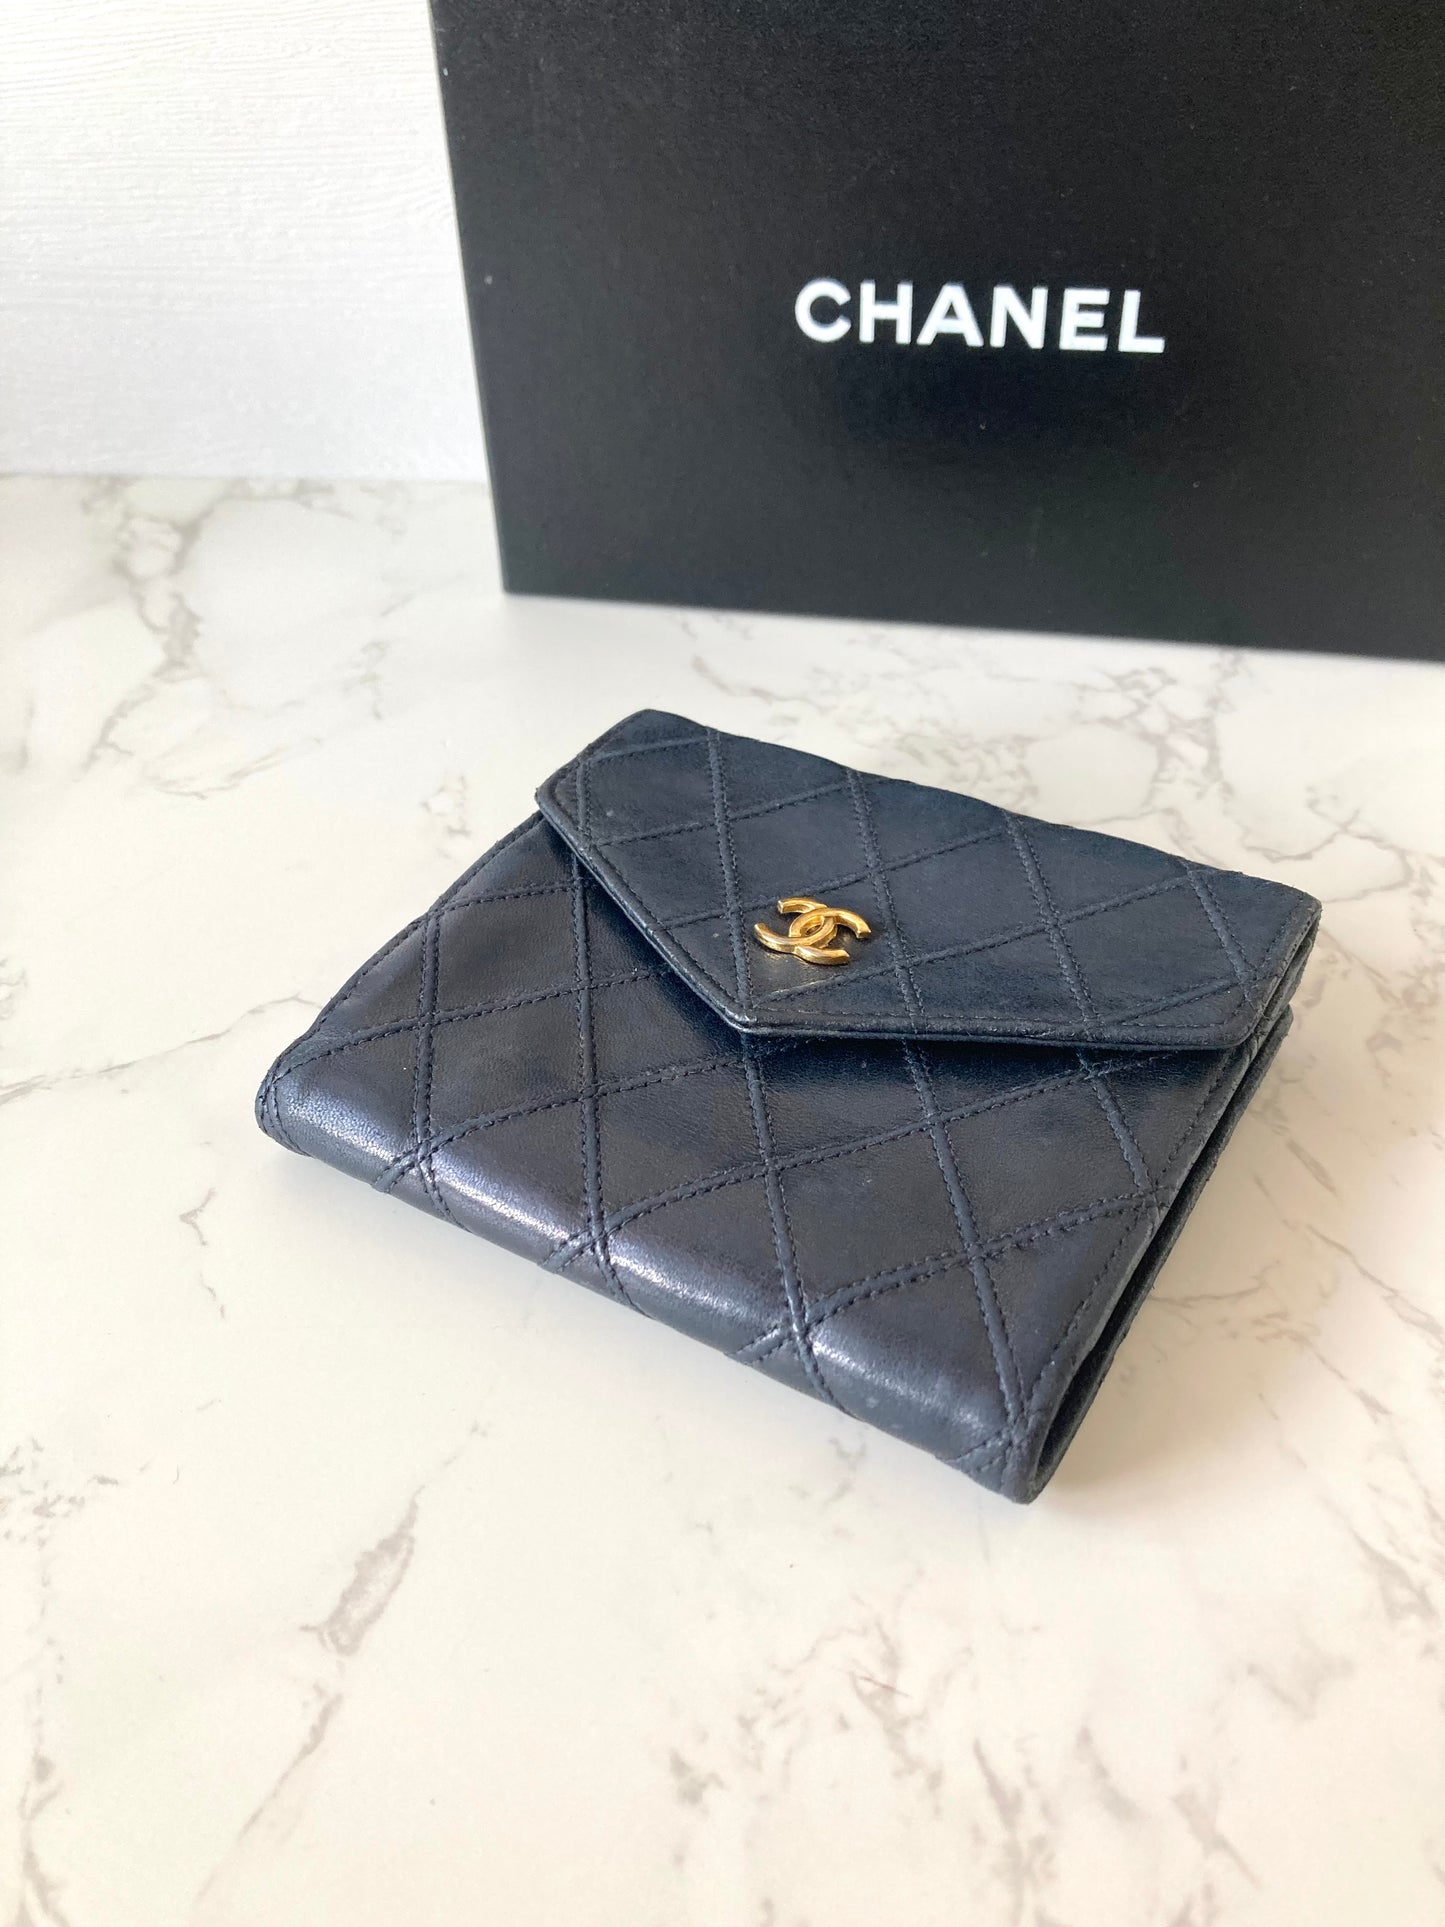 CHANEL Black x Gold Lamb Leather Compact Wallet